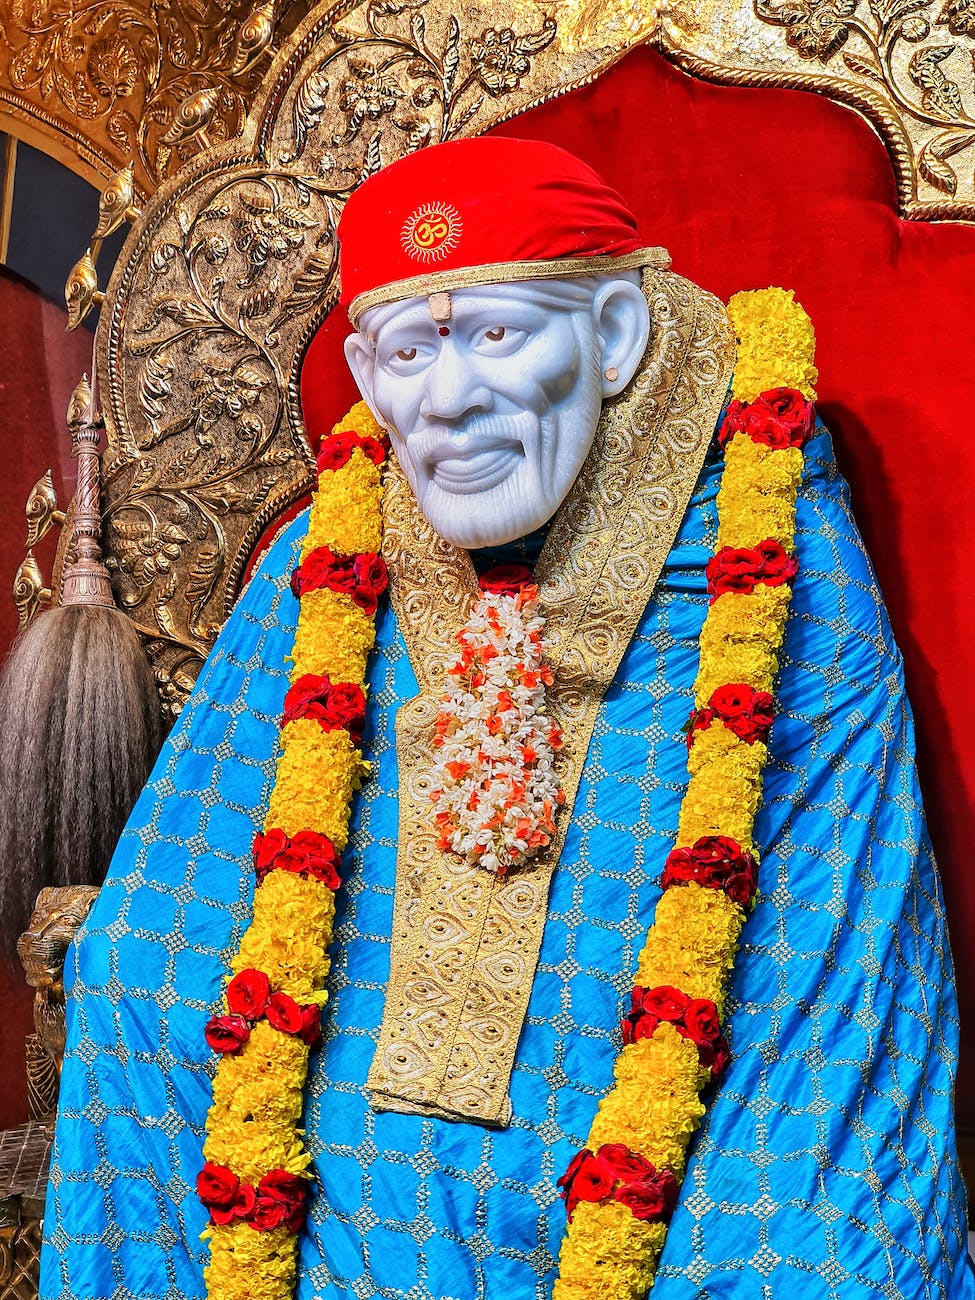 sai baba statue dressed in bright clothes adorned with flower wreath